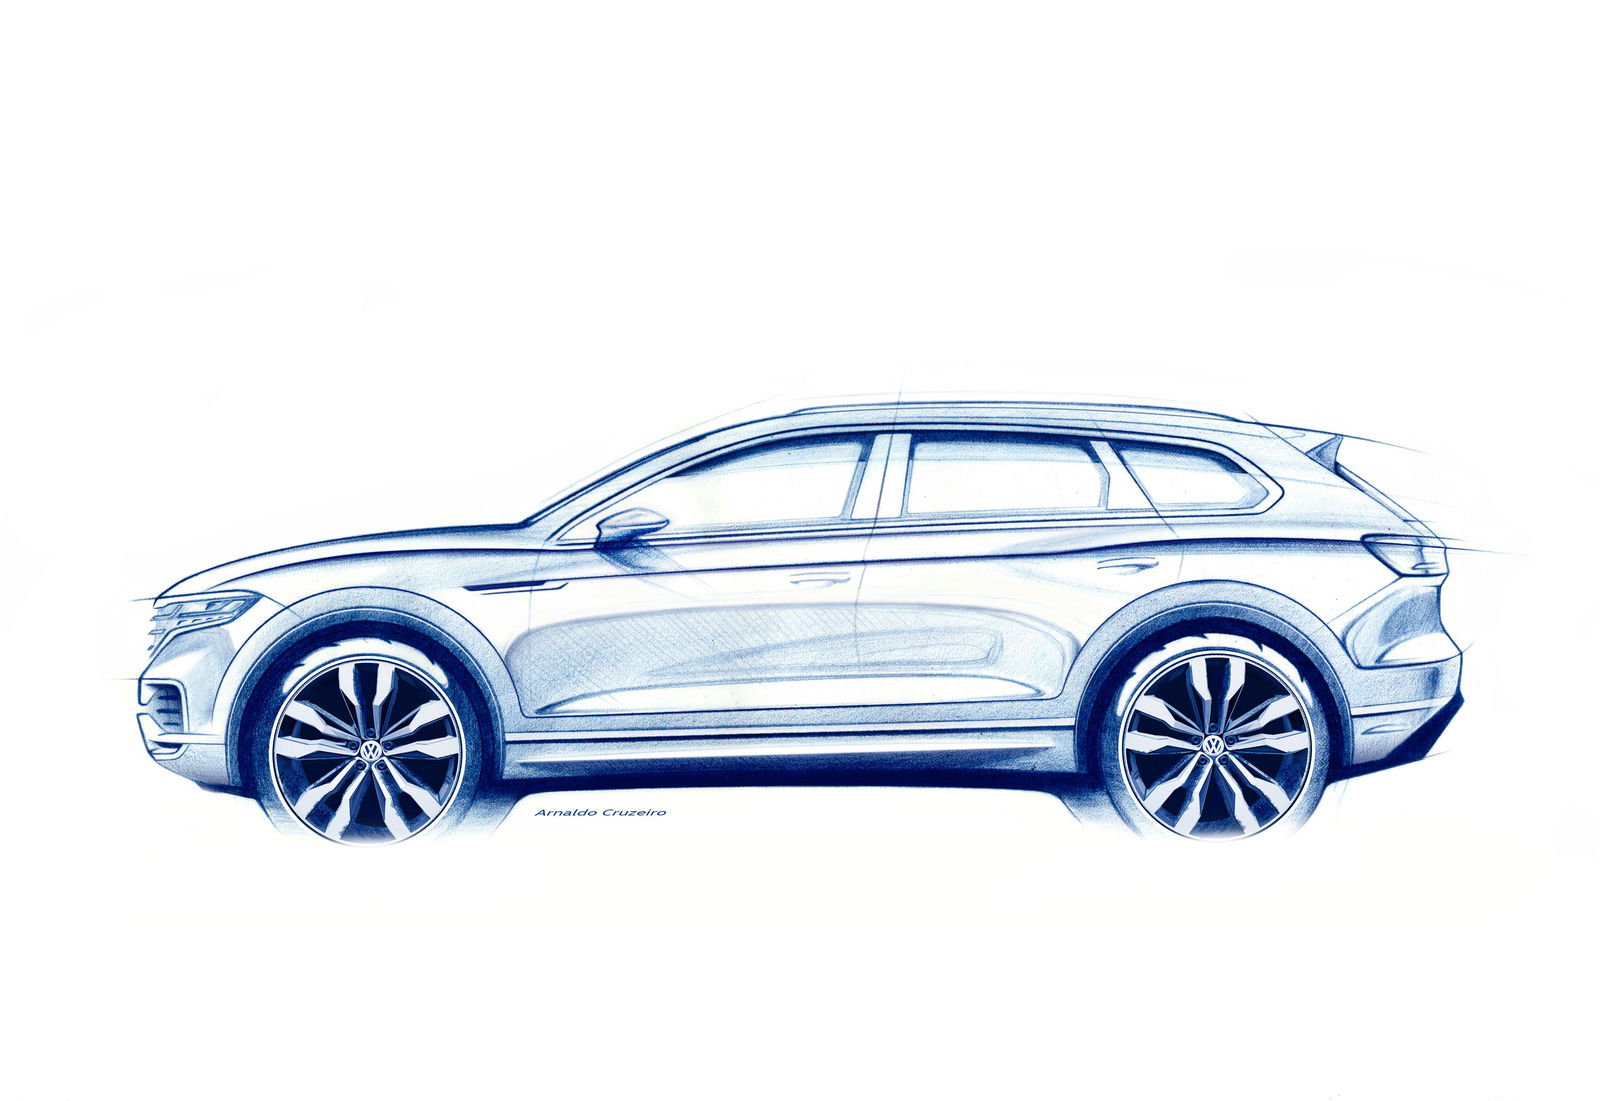 First look at the completely new developed Touareg